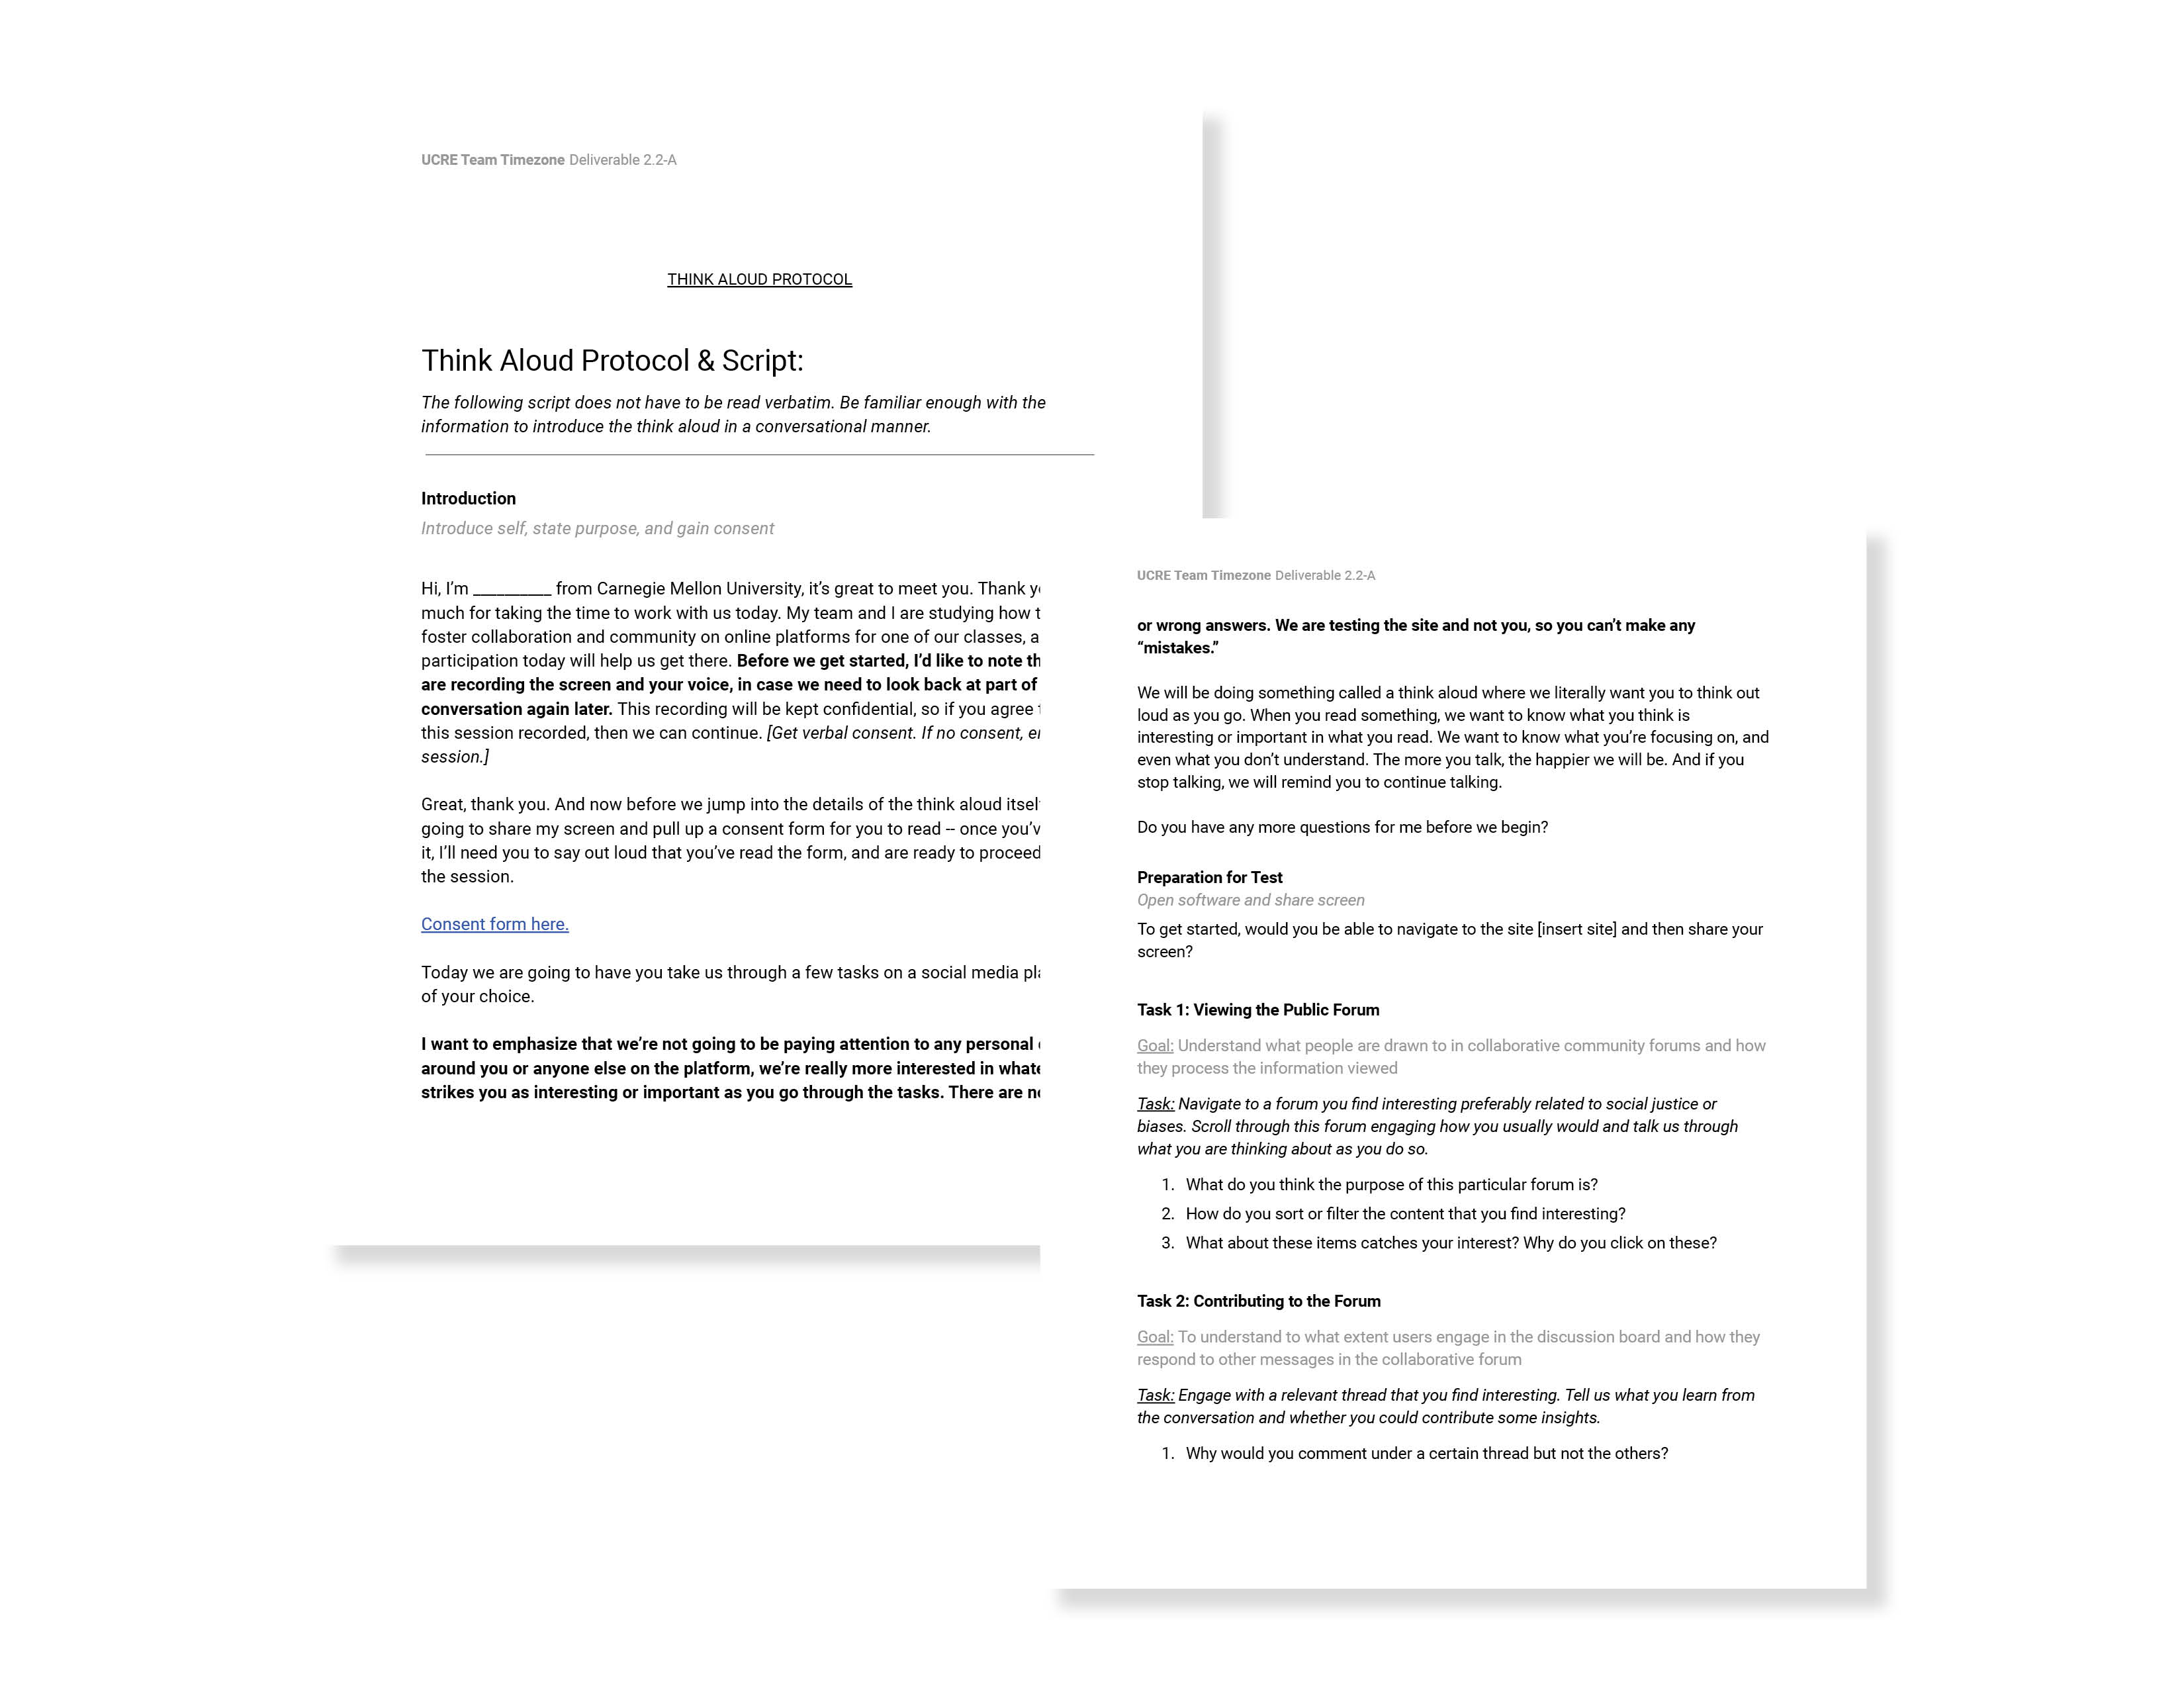 Two pages from an example of a think aloud protocol outlining tasks